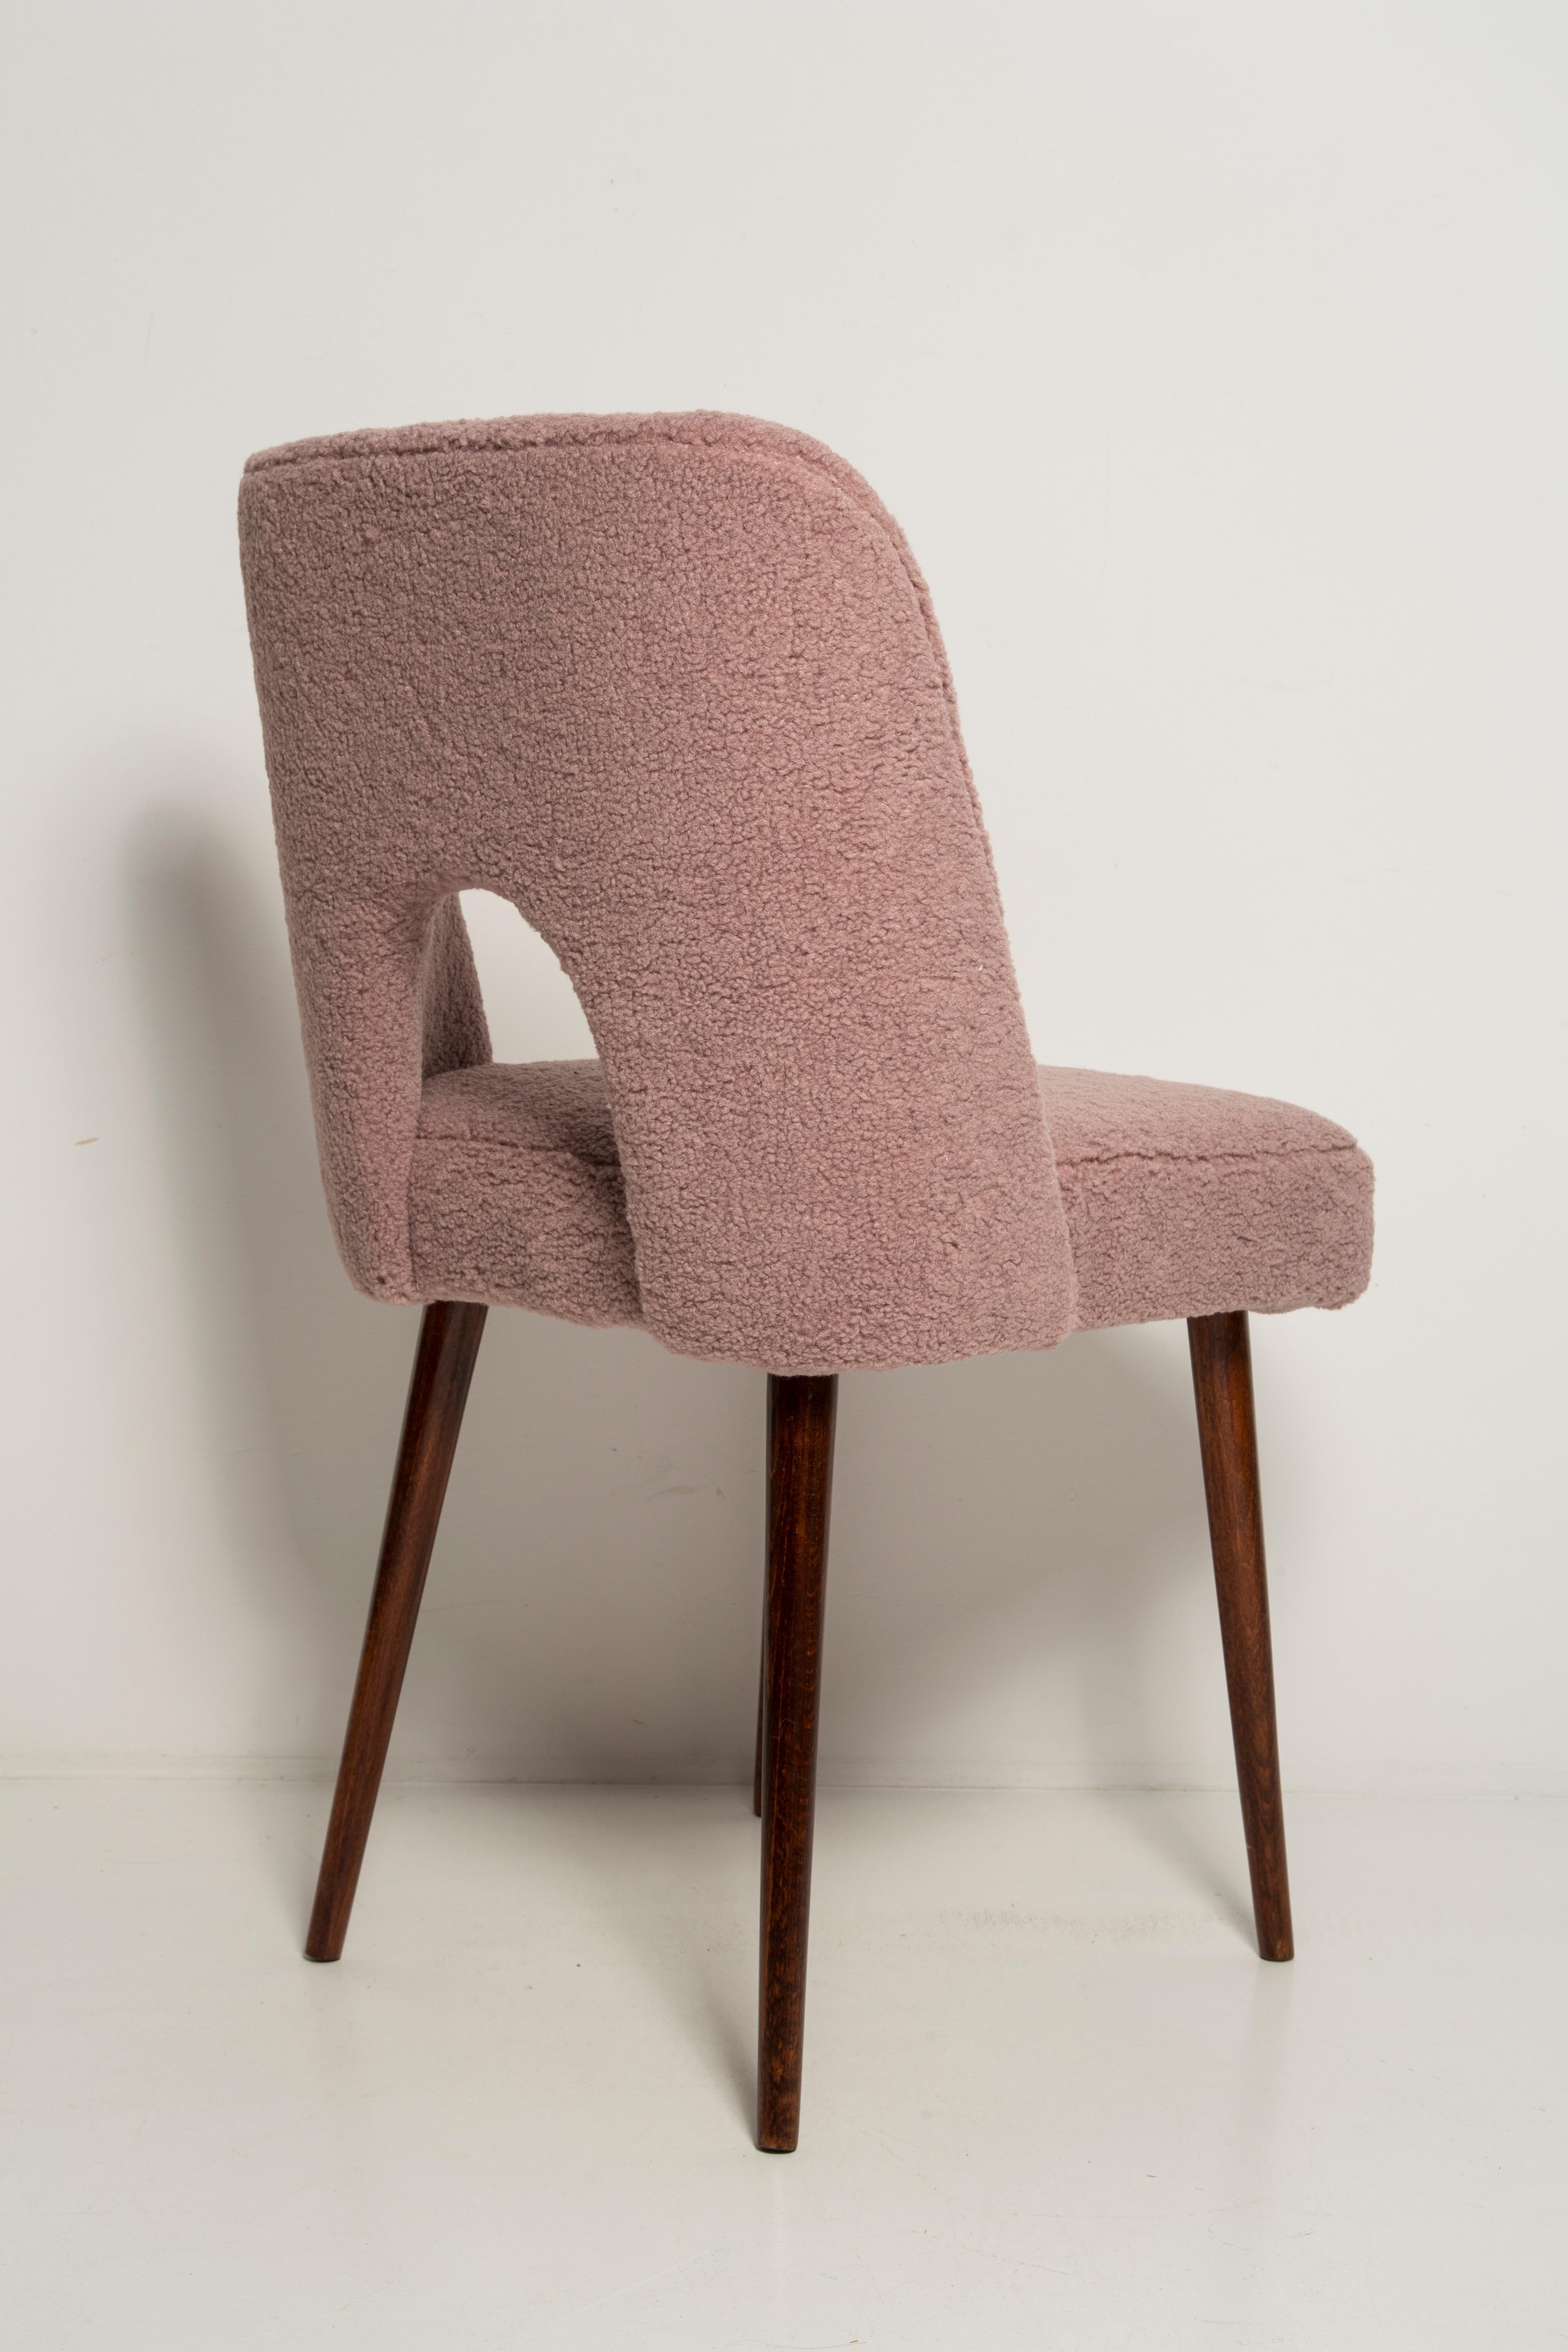 Textile Midcentury Pink Bouclé 'Shell' Chair, Europe, 1960s For Sale